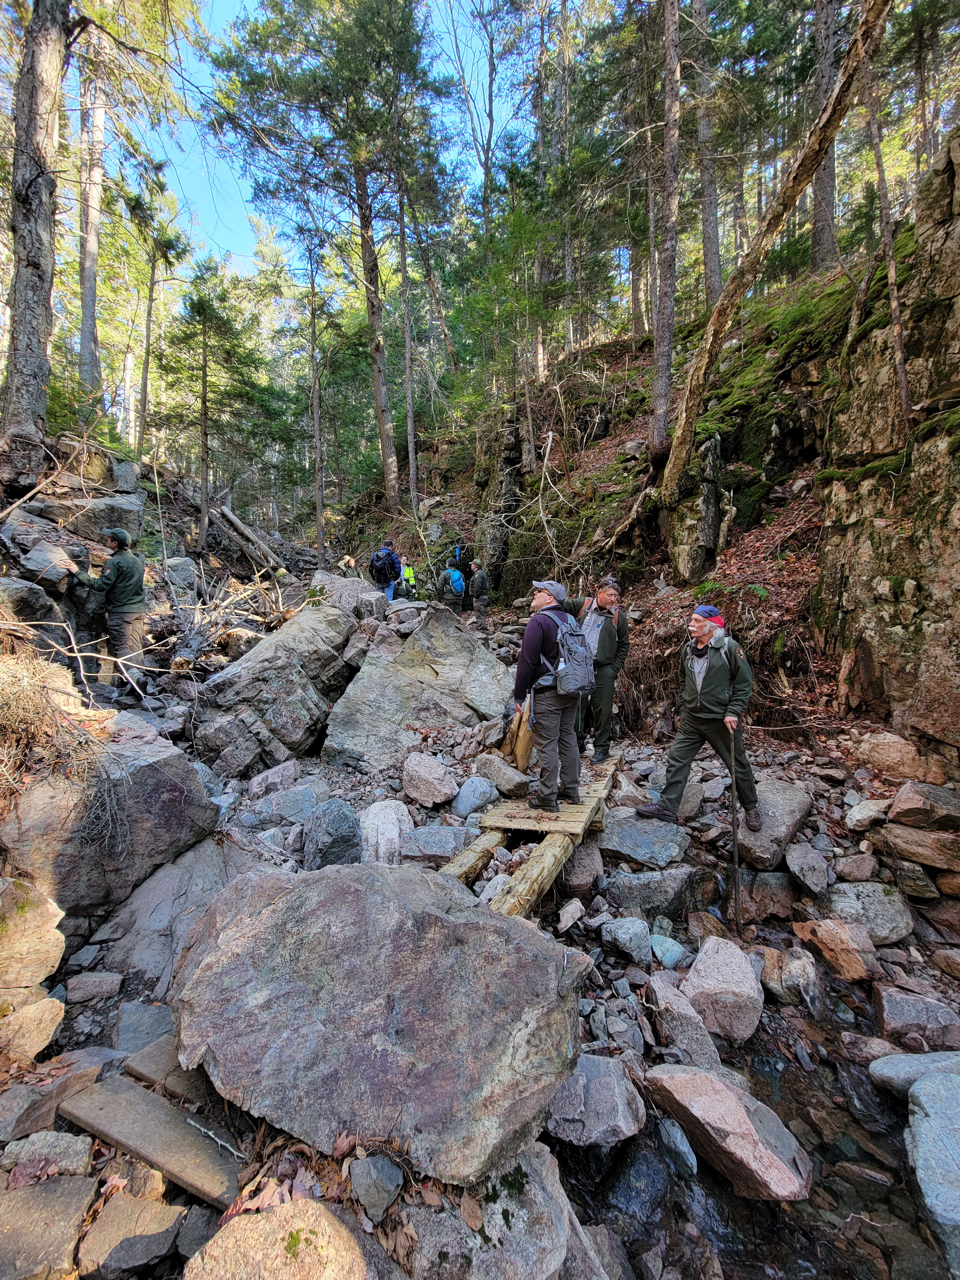 Three people stand in the ravine of Maple Spring. A large boulder sits on a broken wooden footbridge. Other large rocks and boulders fill the stream bed. Eroded banks are visible. More people examine damage in the background.